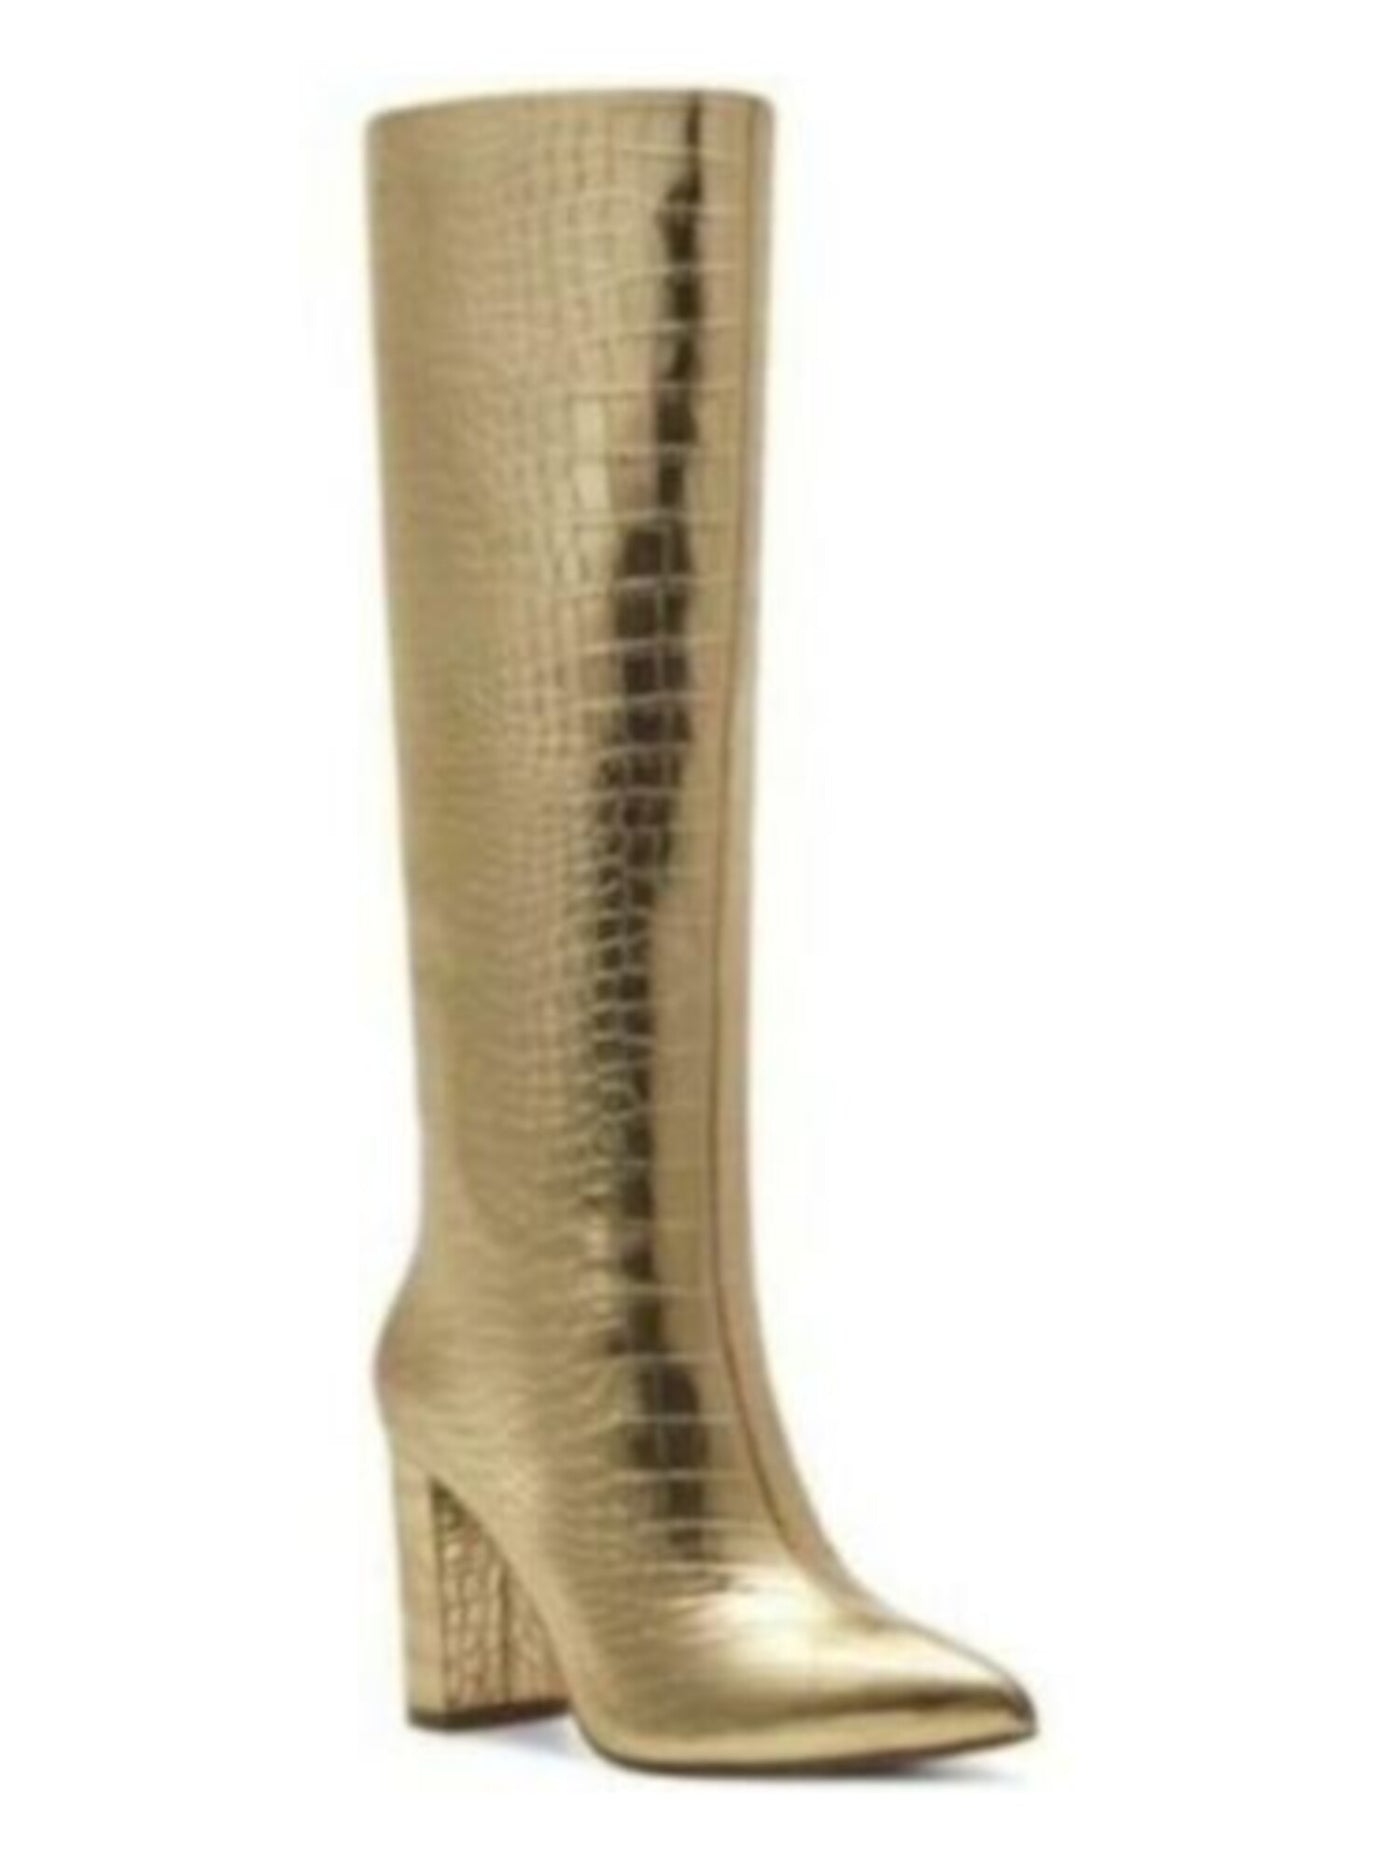 INC Womens Gold Snake Print Flex Gore Padded Comfort Paiton Pointed Toe Block Heel Zip-Up Boots Shoes 5.5 M